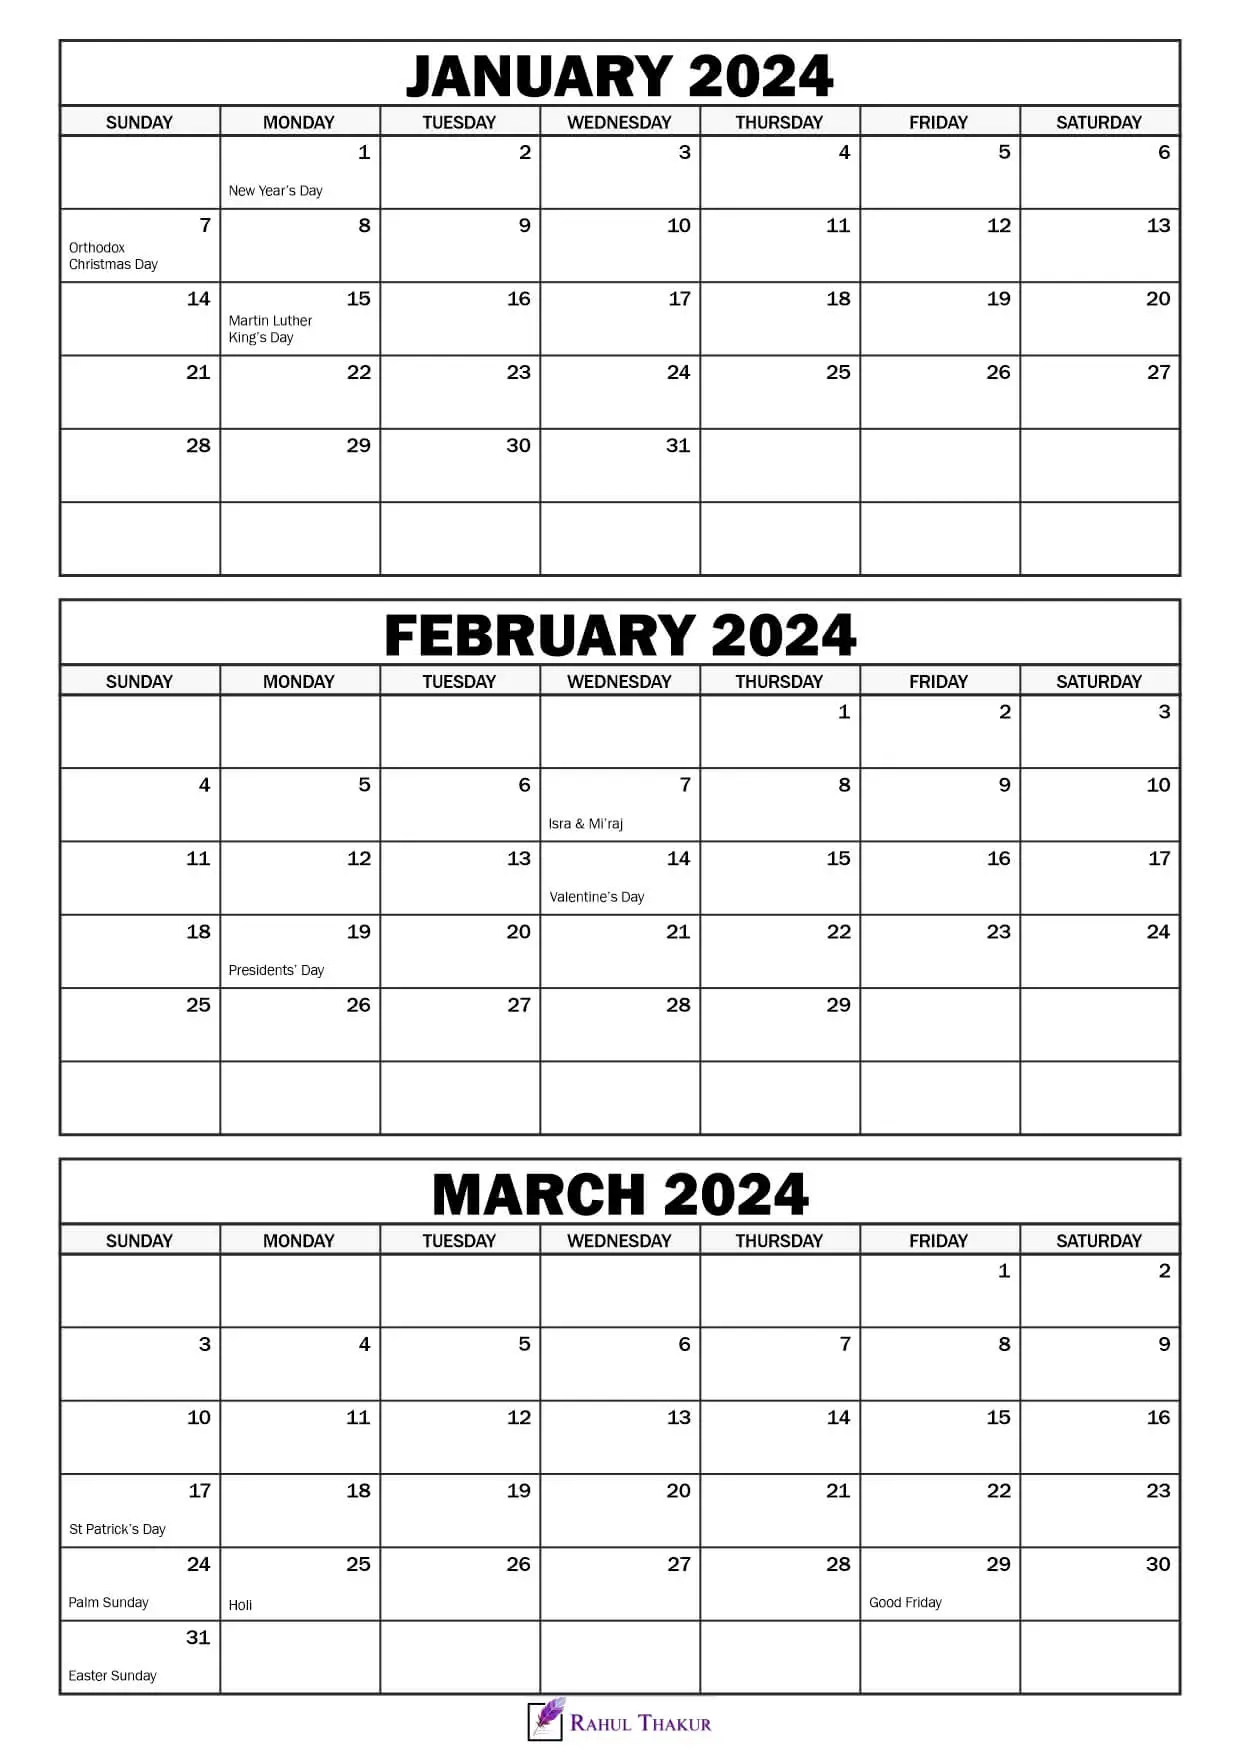 Printable January To March 2024 Calendar Template - Thakur Writes for January February March 2024 Calendar Printable